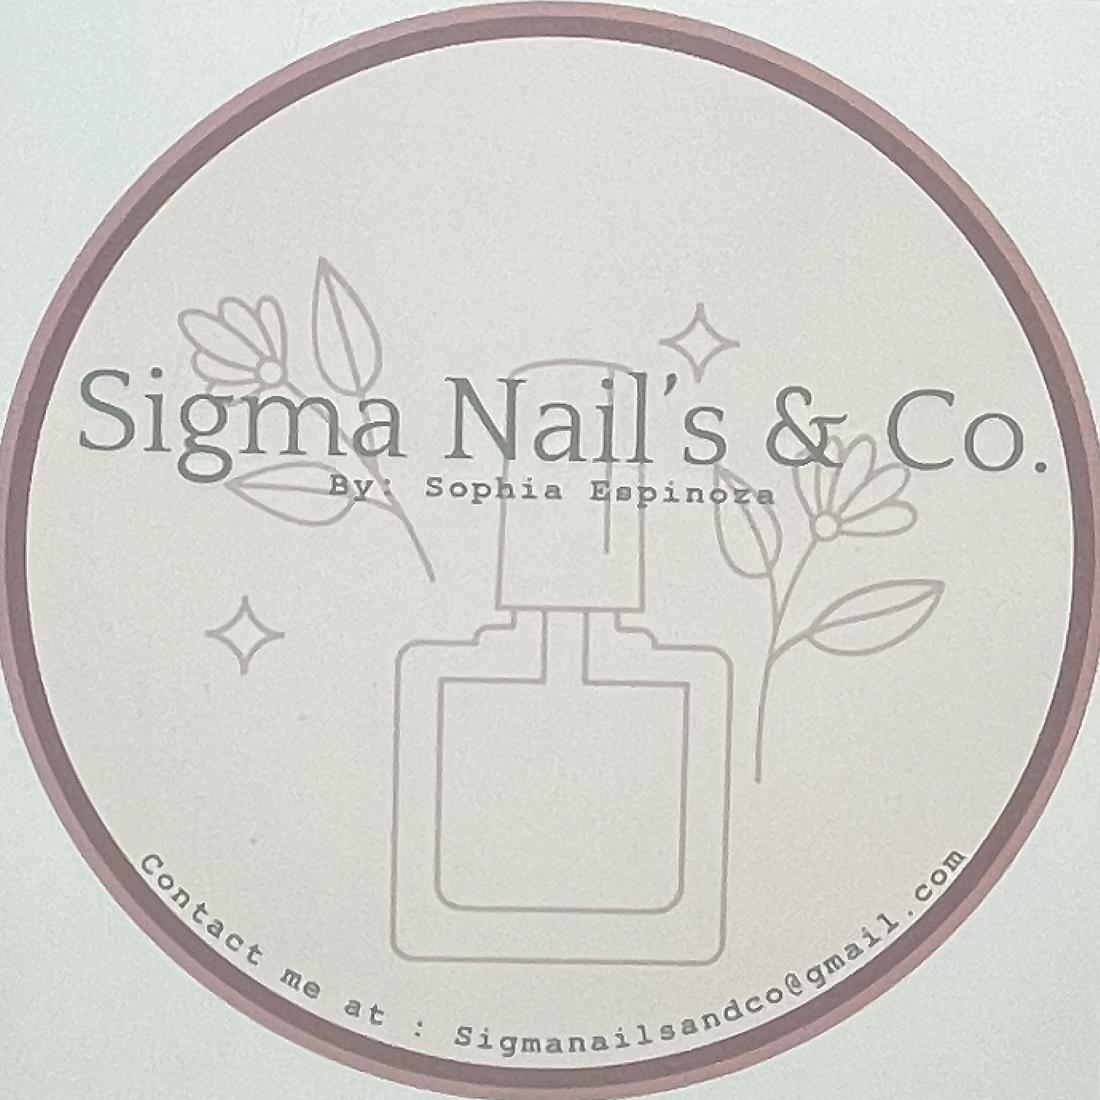 SigmaNailsAndCo's images